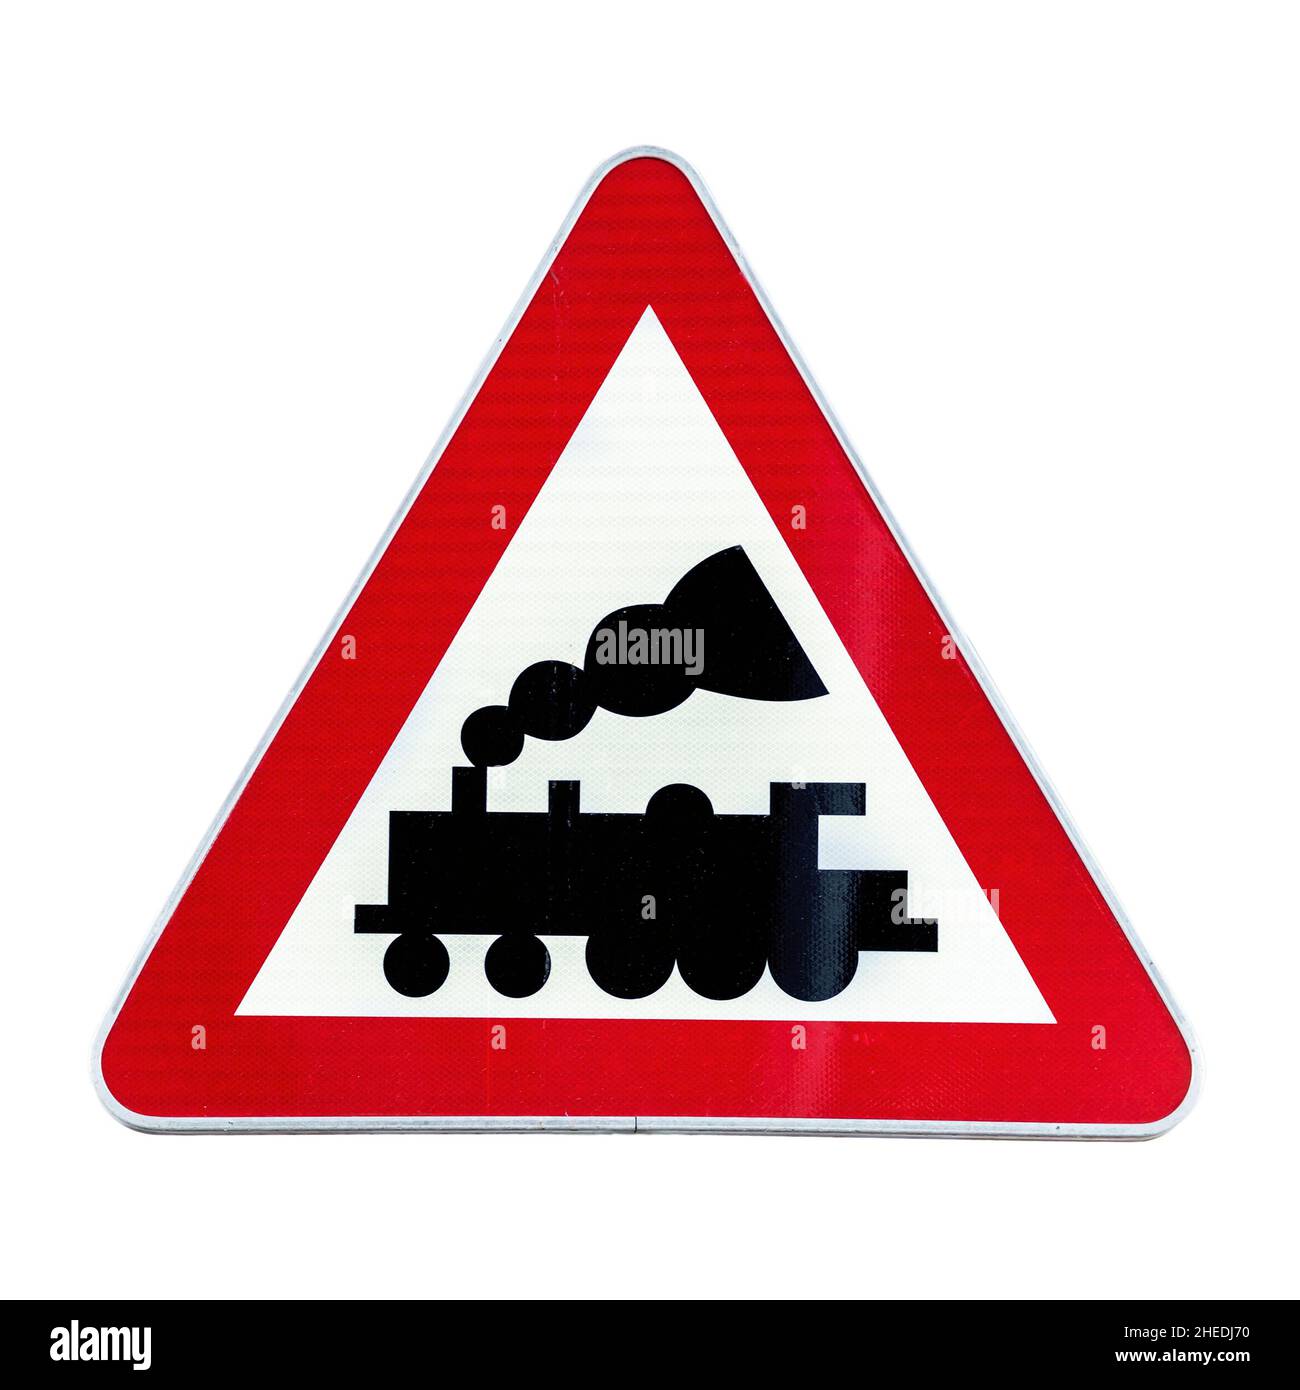 Railroad Level Crossing Sign without barrier or gate ahead the road Stock Photo